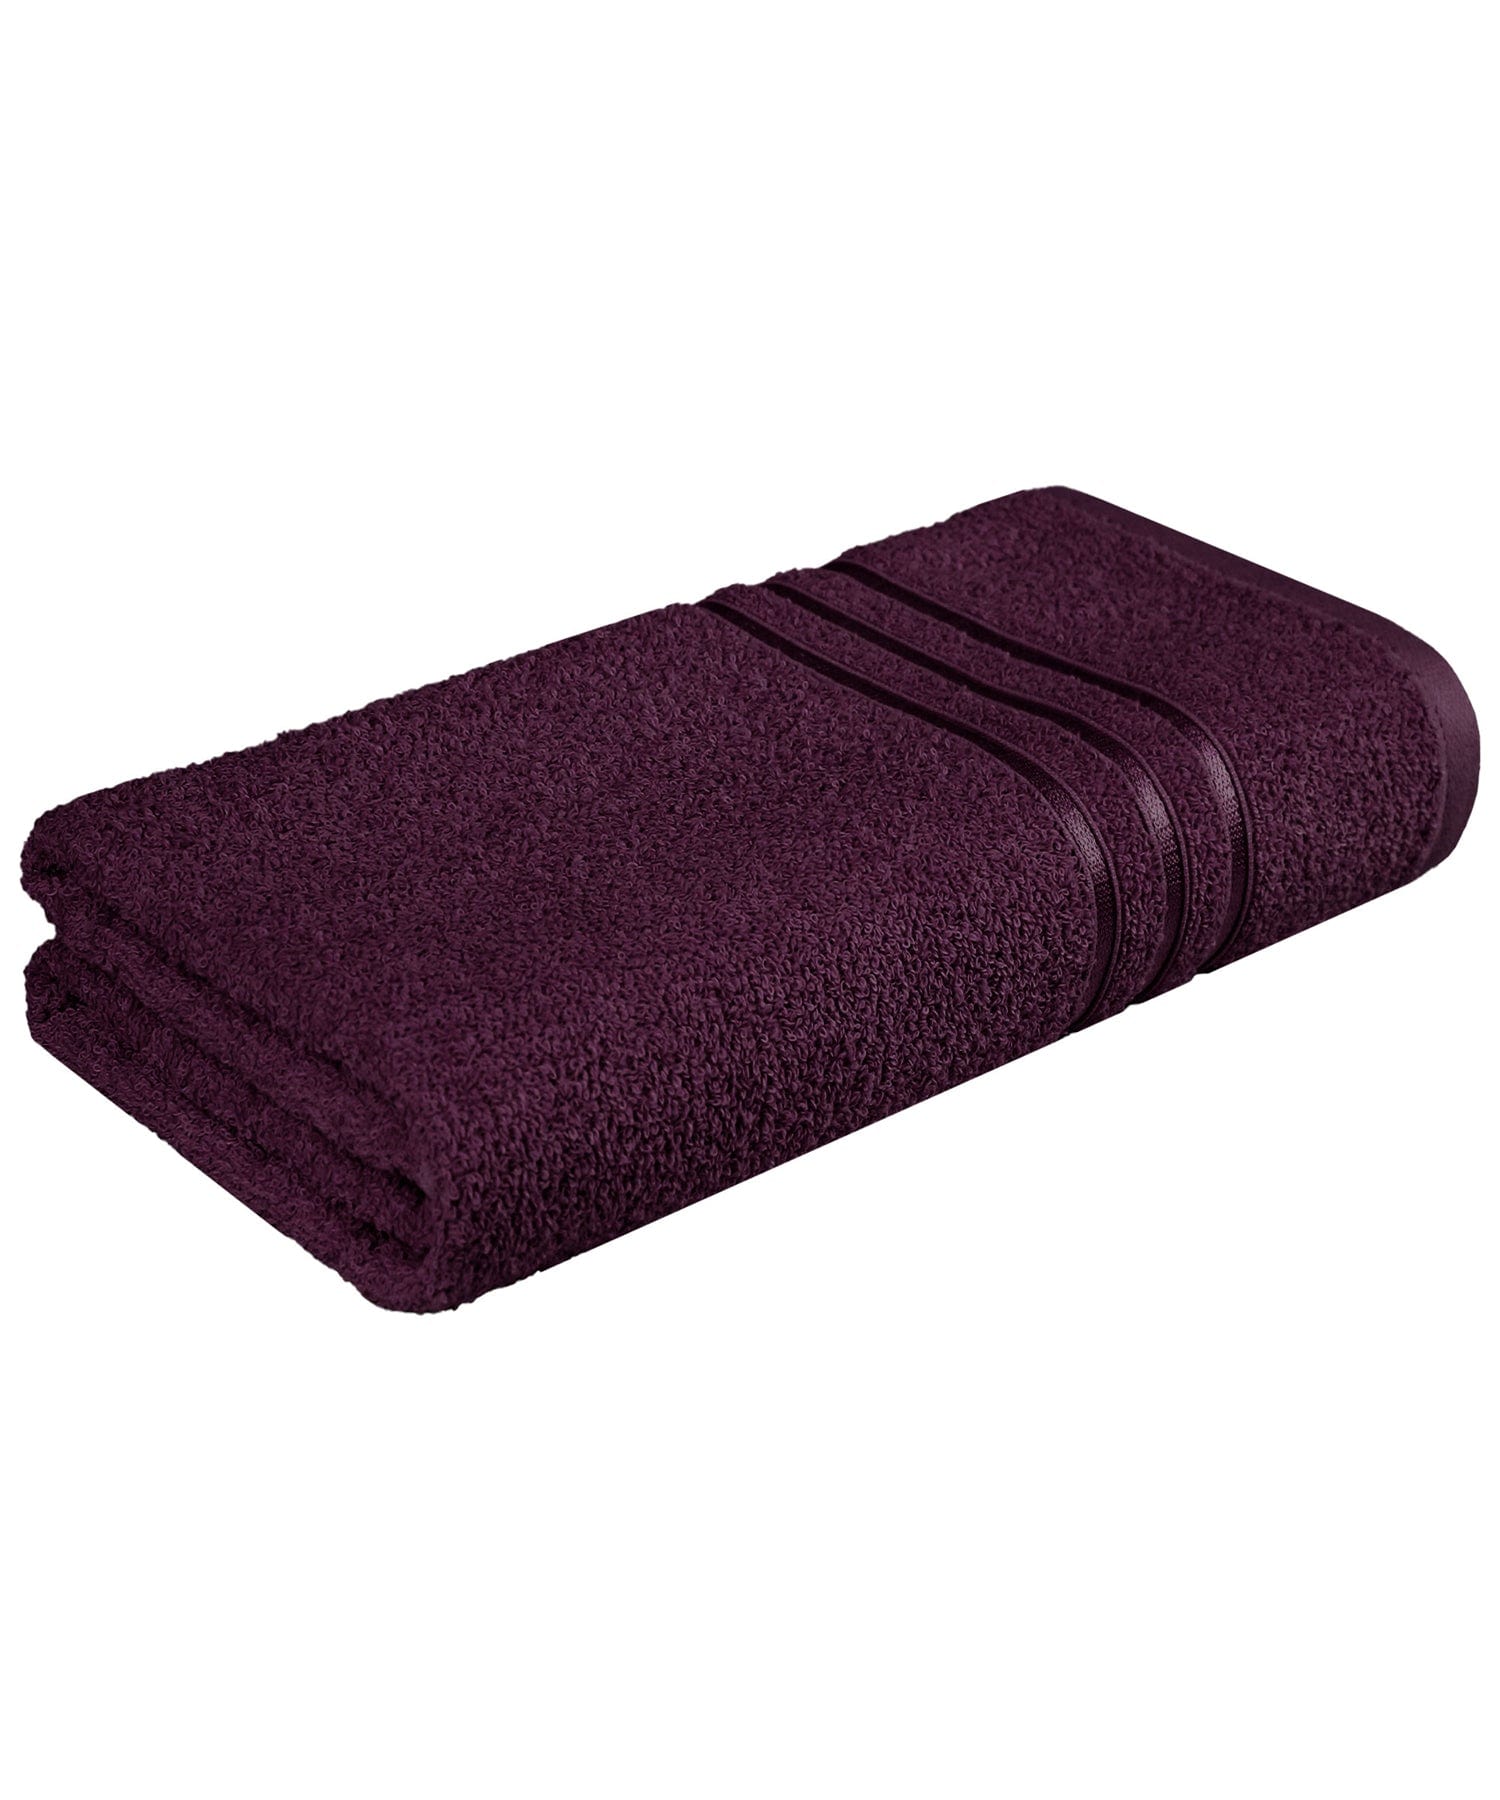 COMFORT LIVING TOWELS,100% Cotton,Quicky Dry,Light Weight, BLACK CURRANT